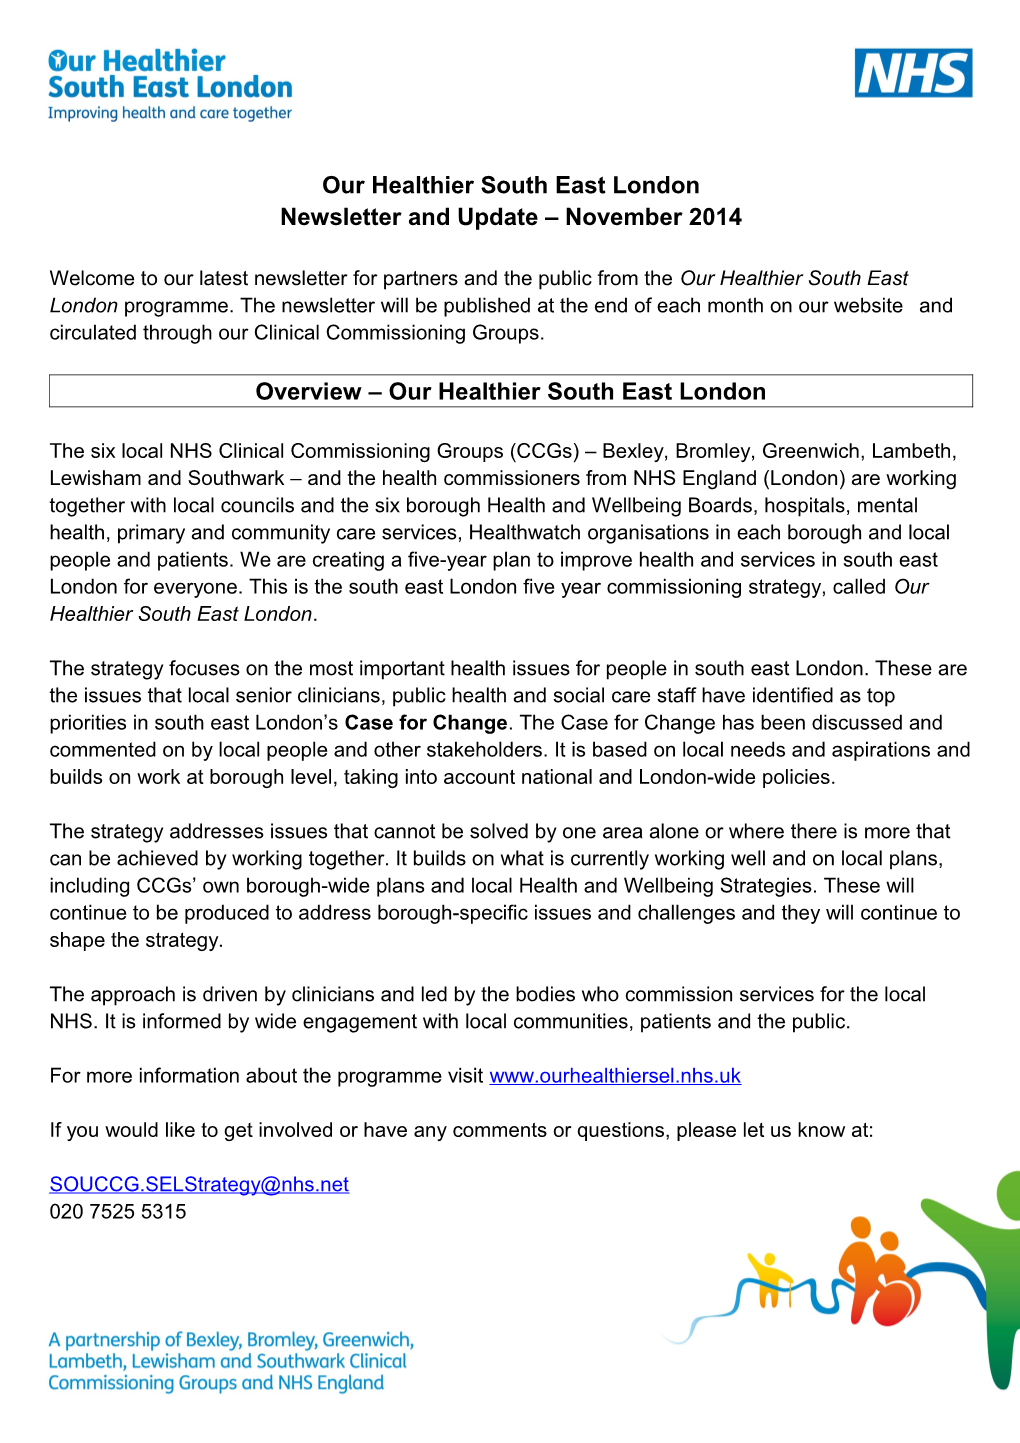 Our Healthier South East London